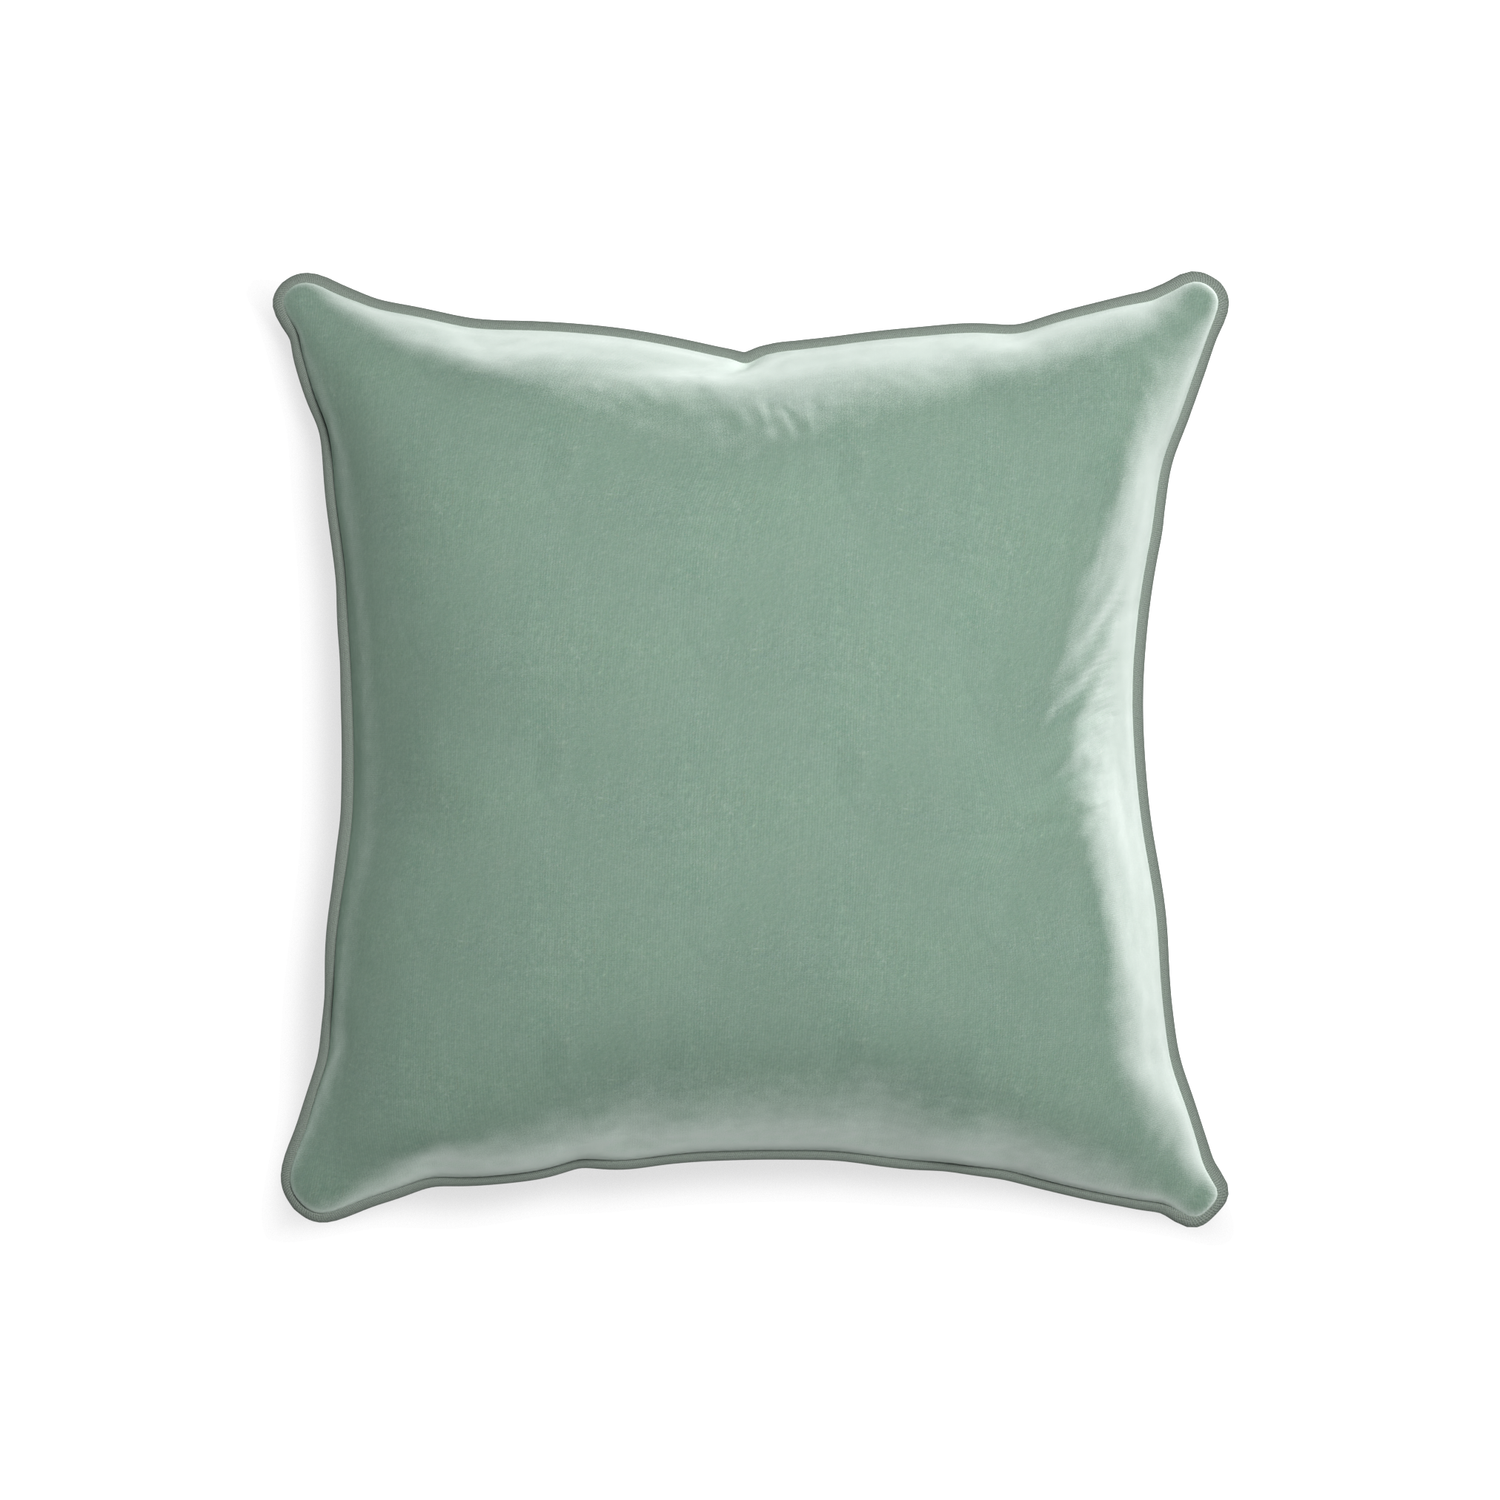 20-square sea salt velvet custom blue greenpillow with sage piping on white background